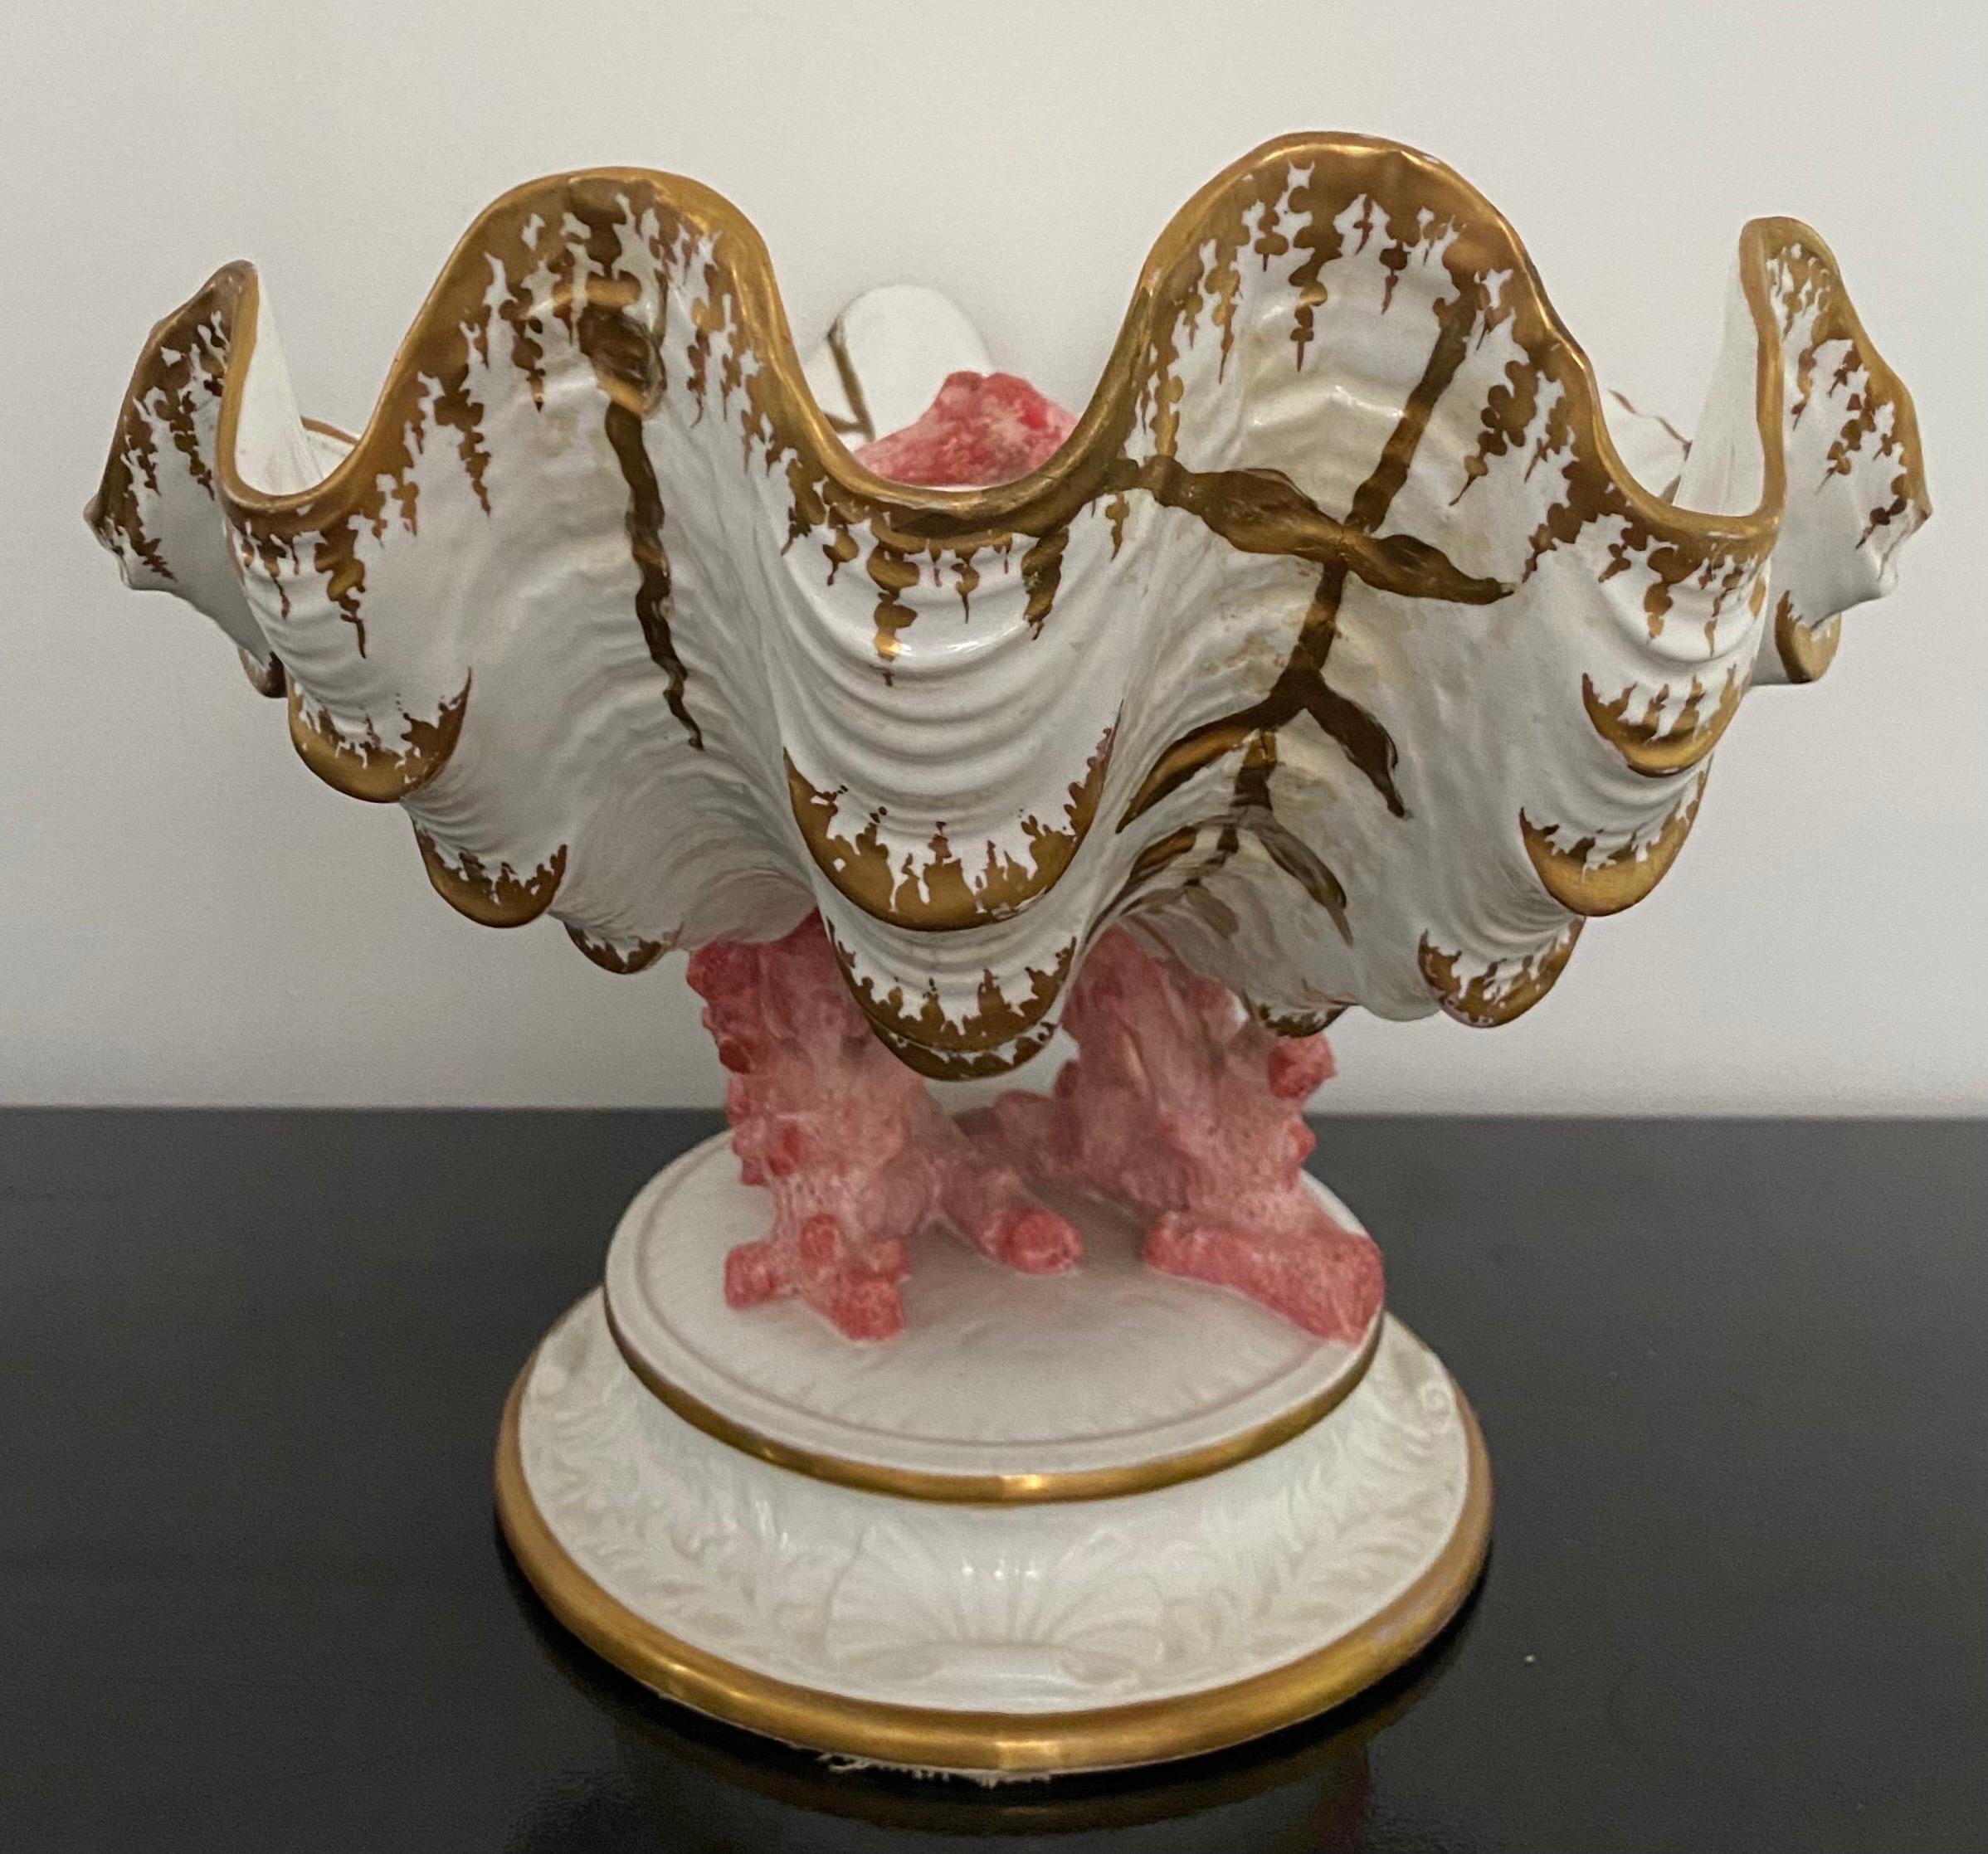 20th Century Rare Wedgwood Coral and Clamshells Decorative Pedestal Table Centerpiece Dish